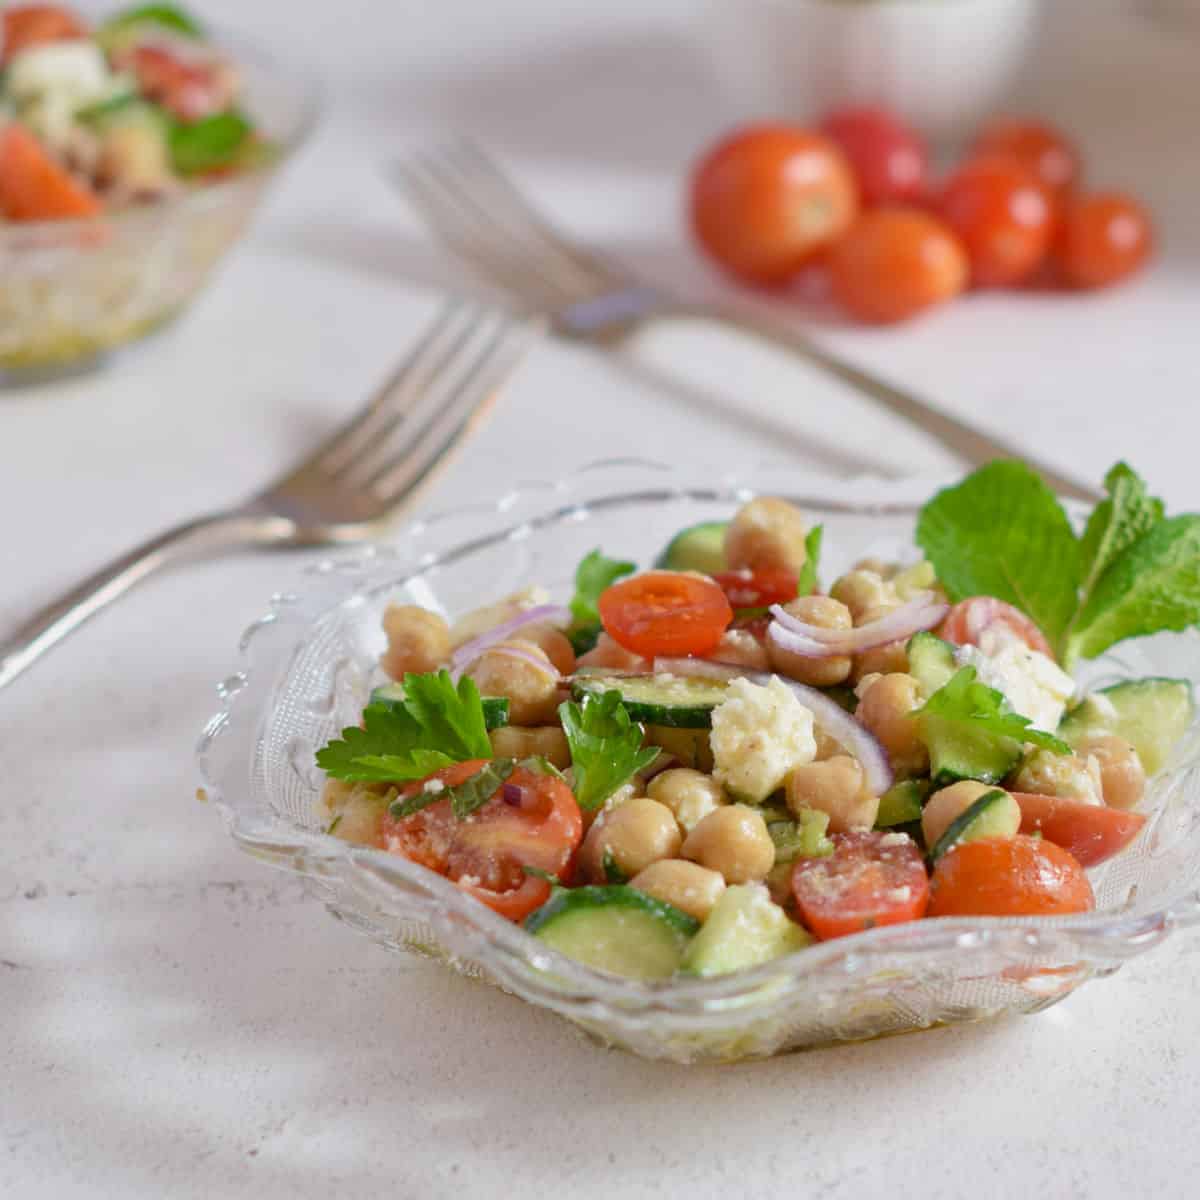 Fresh tomatoes highlight this Mediterranean Chickpea Salad with Feta.